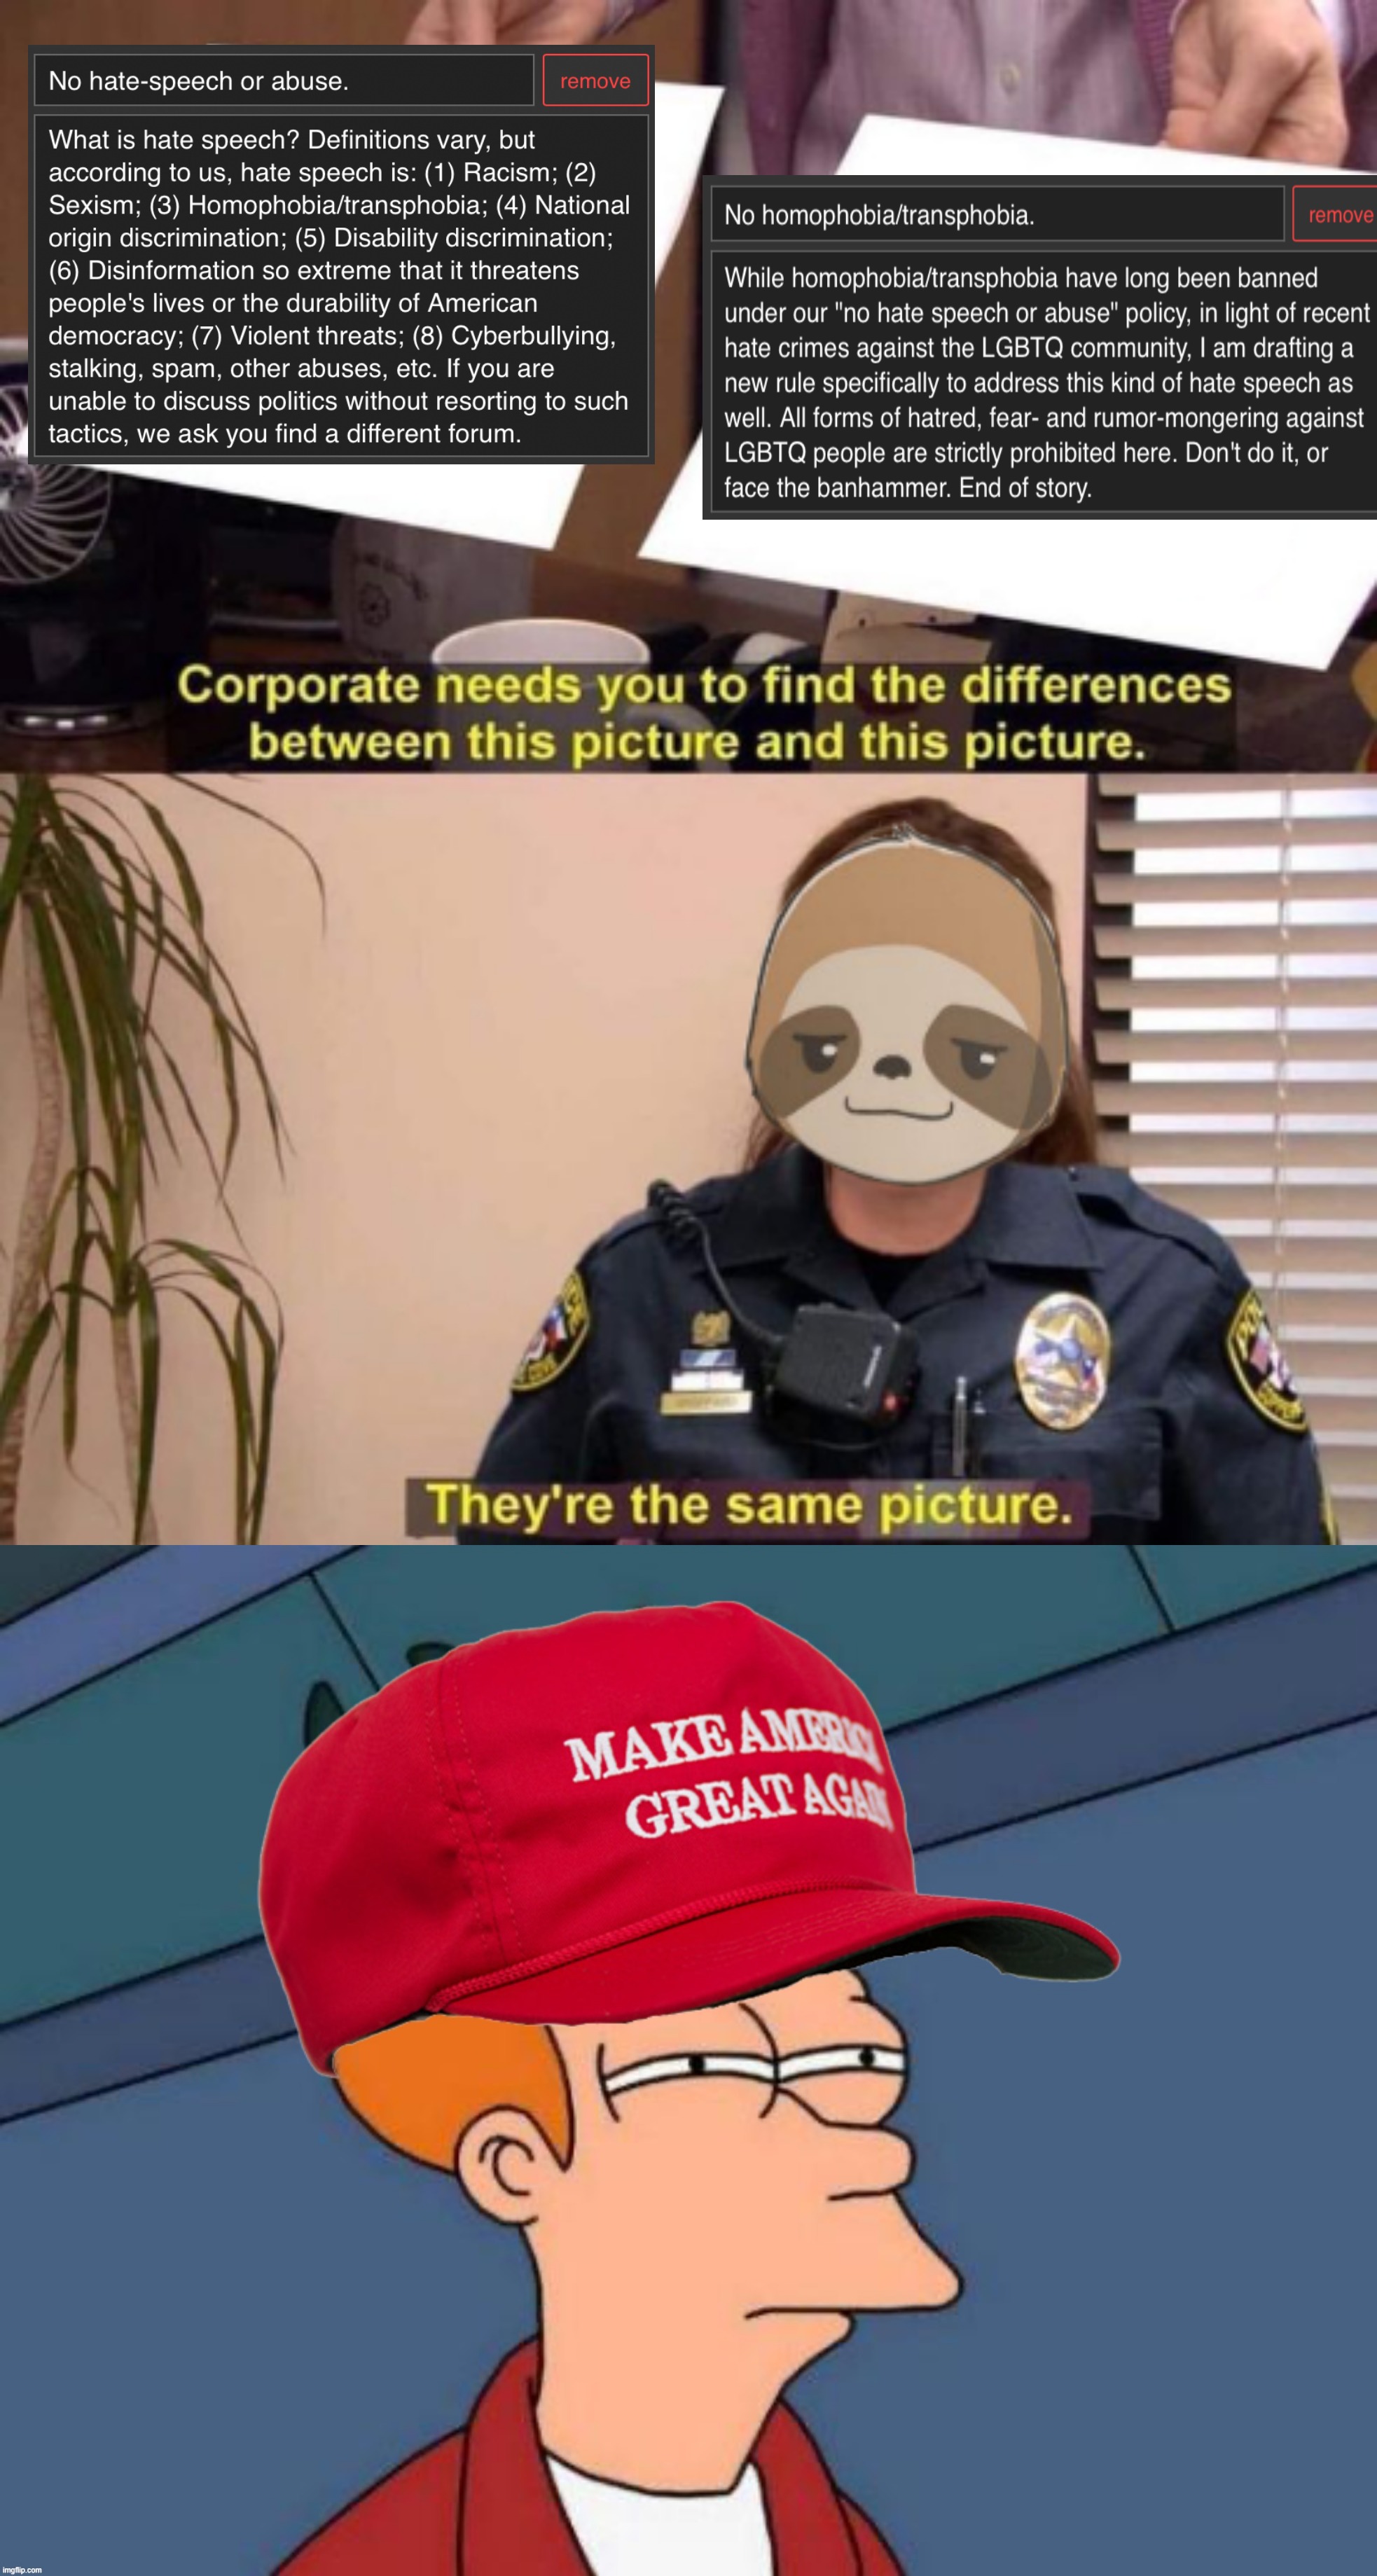 Redundant rules. Why not? Belt-and-suspenders! | image tagged in cop sloth they're the same picture,maga futurama fry,new rules,hate speech,homophobia,transphobia | made w/ Imgflip meme maker